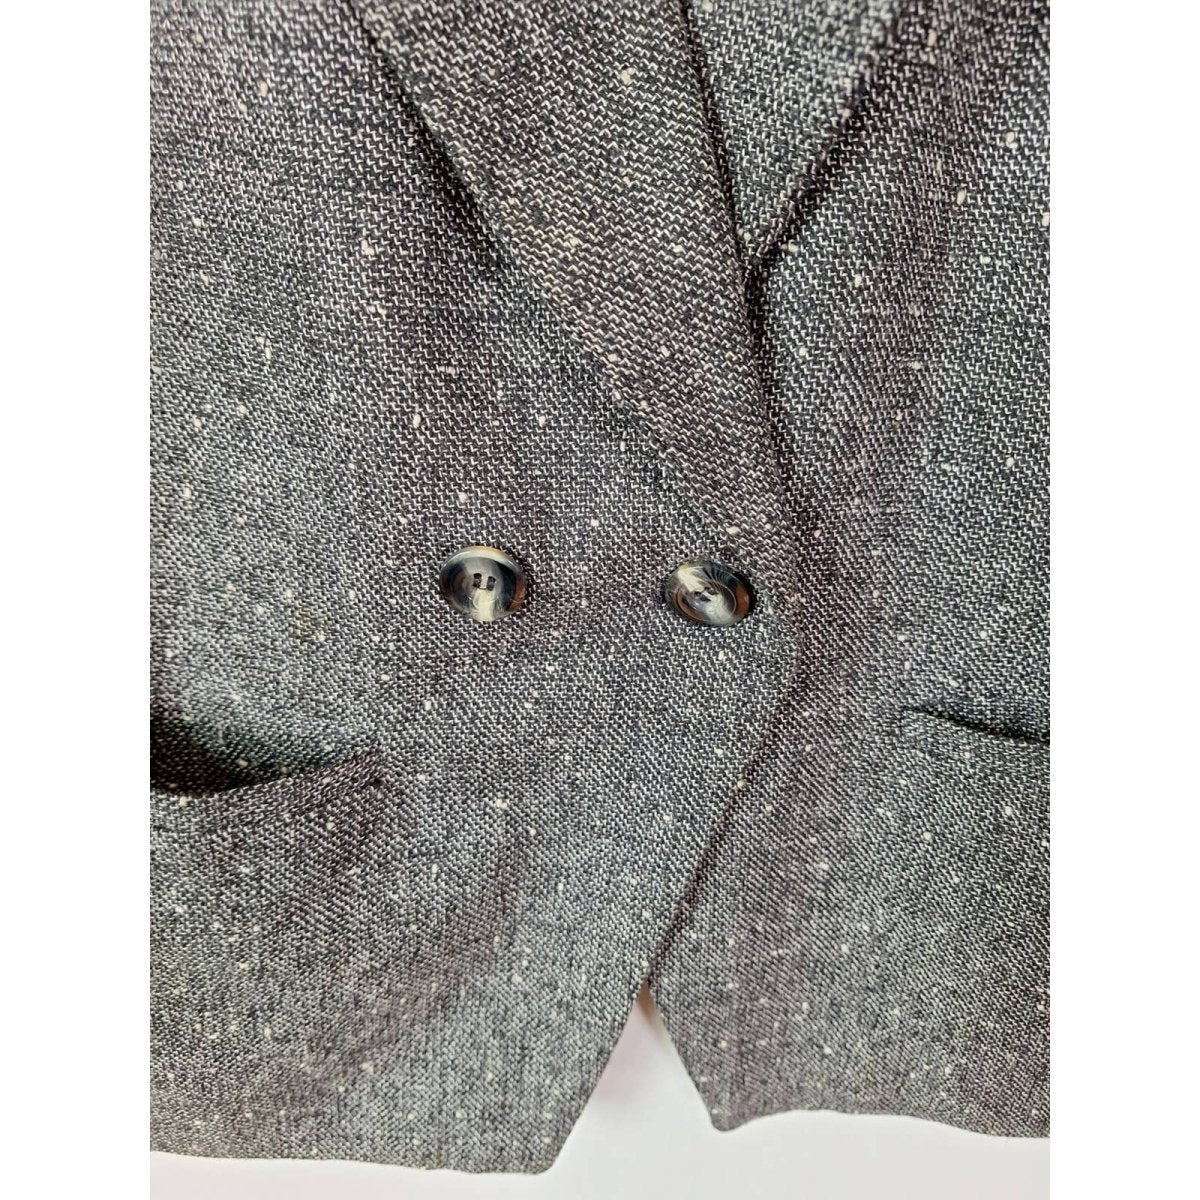 Vintage 80s/90s Drop Waost Speckled Knit Blazer Women's Size S/M 4/6 - themallvintage The Mall Vintage